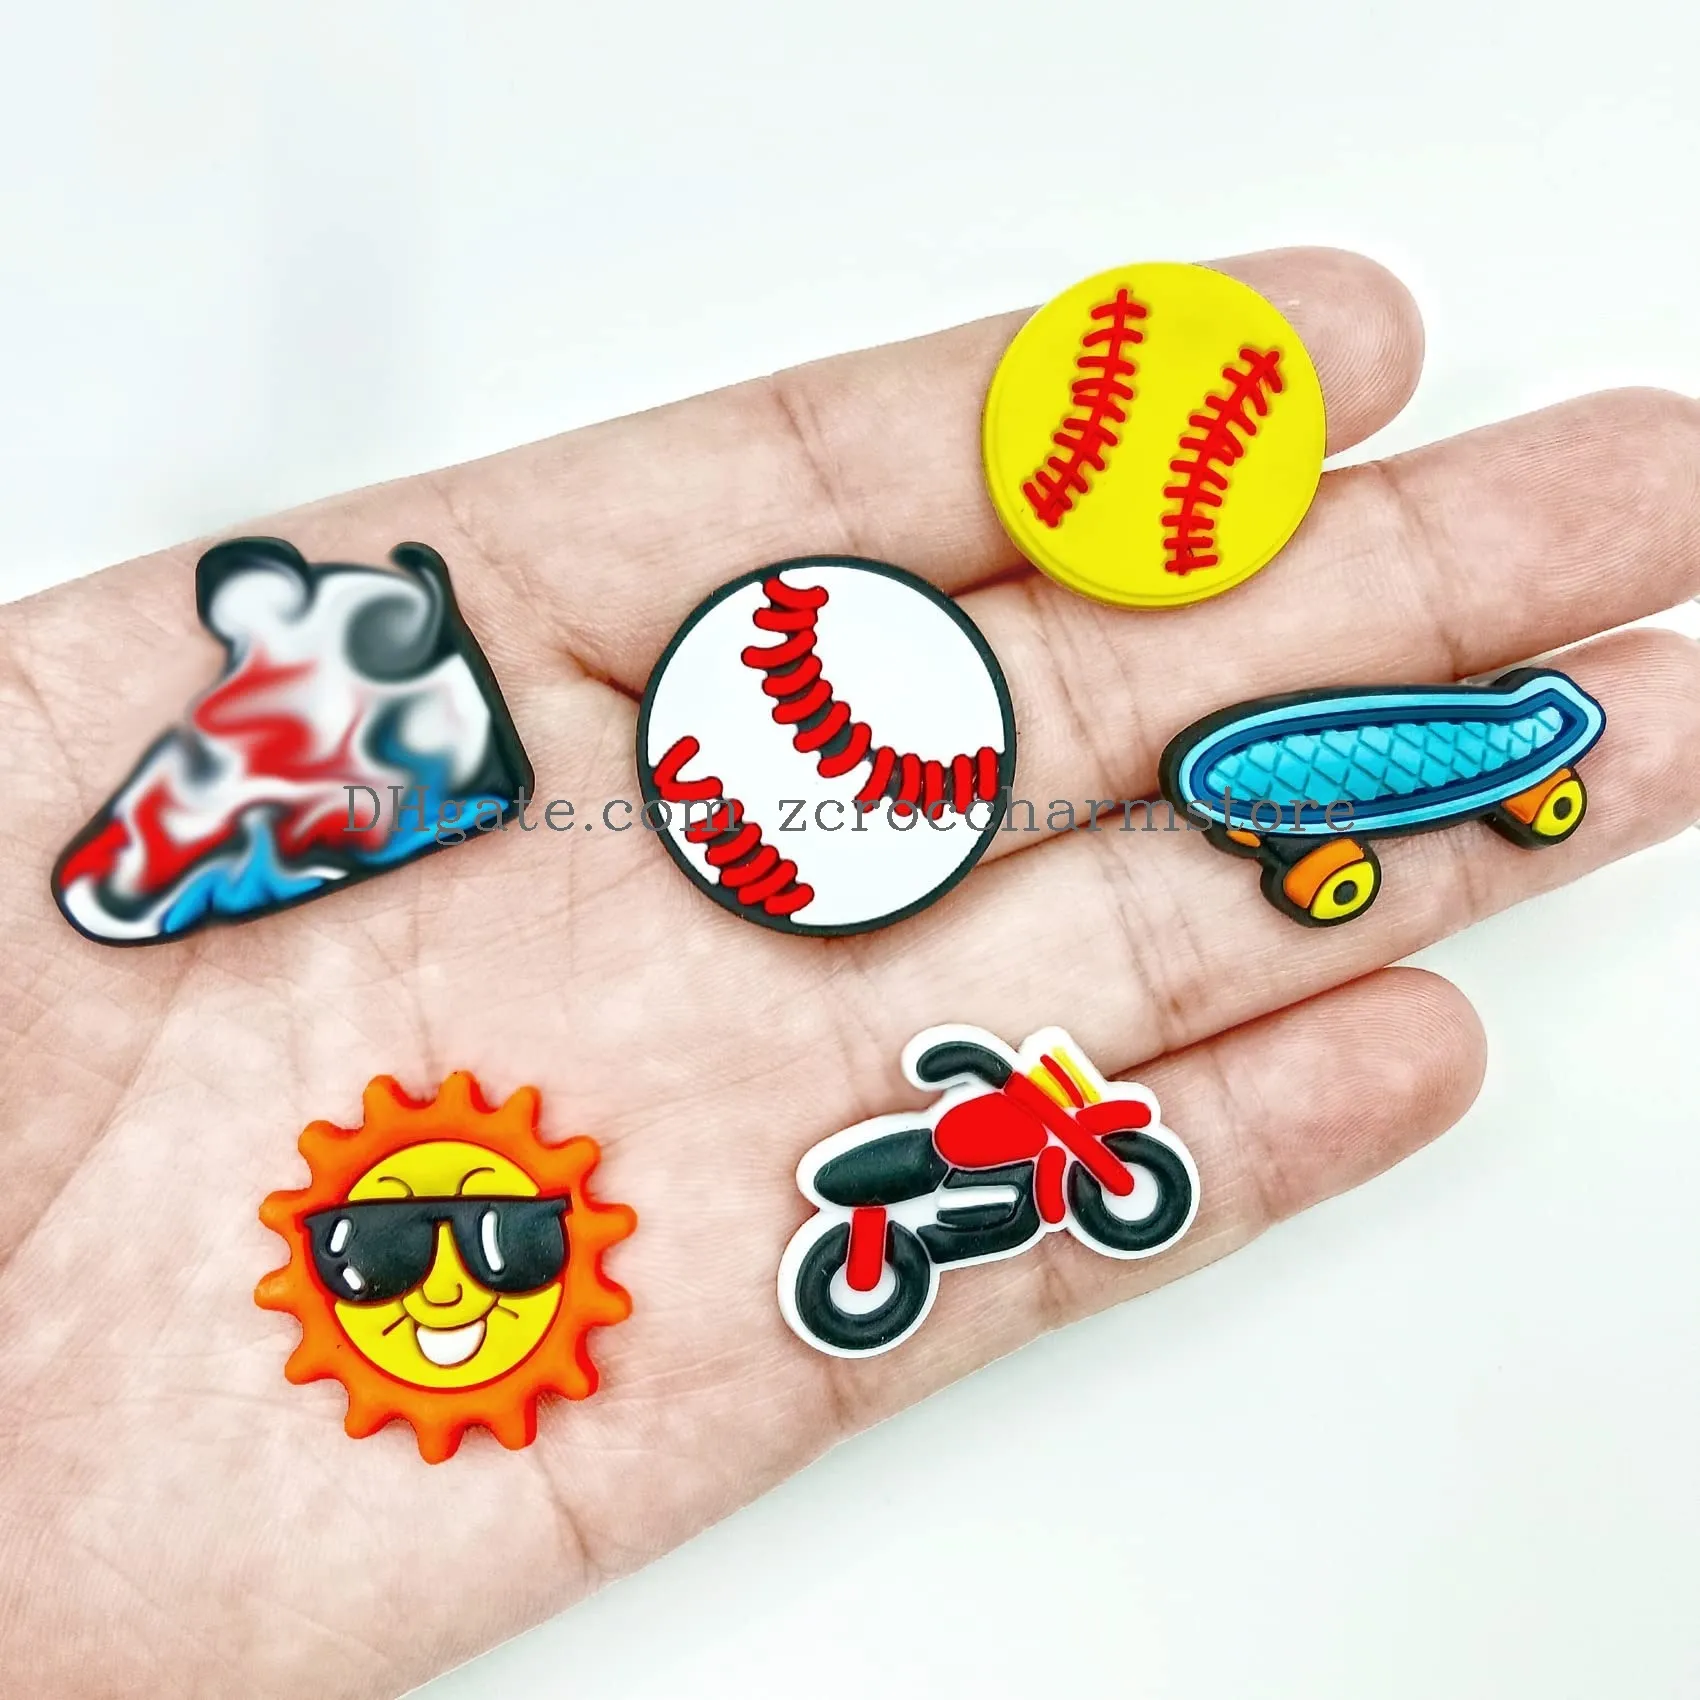 croc charms for boys sports gibits basketball and football baseball softball soccer with sneakers pvc charms for  cute dinosaur shoe charms for bracelet boys croc gibits for kids teens gifts